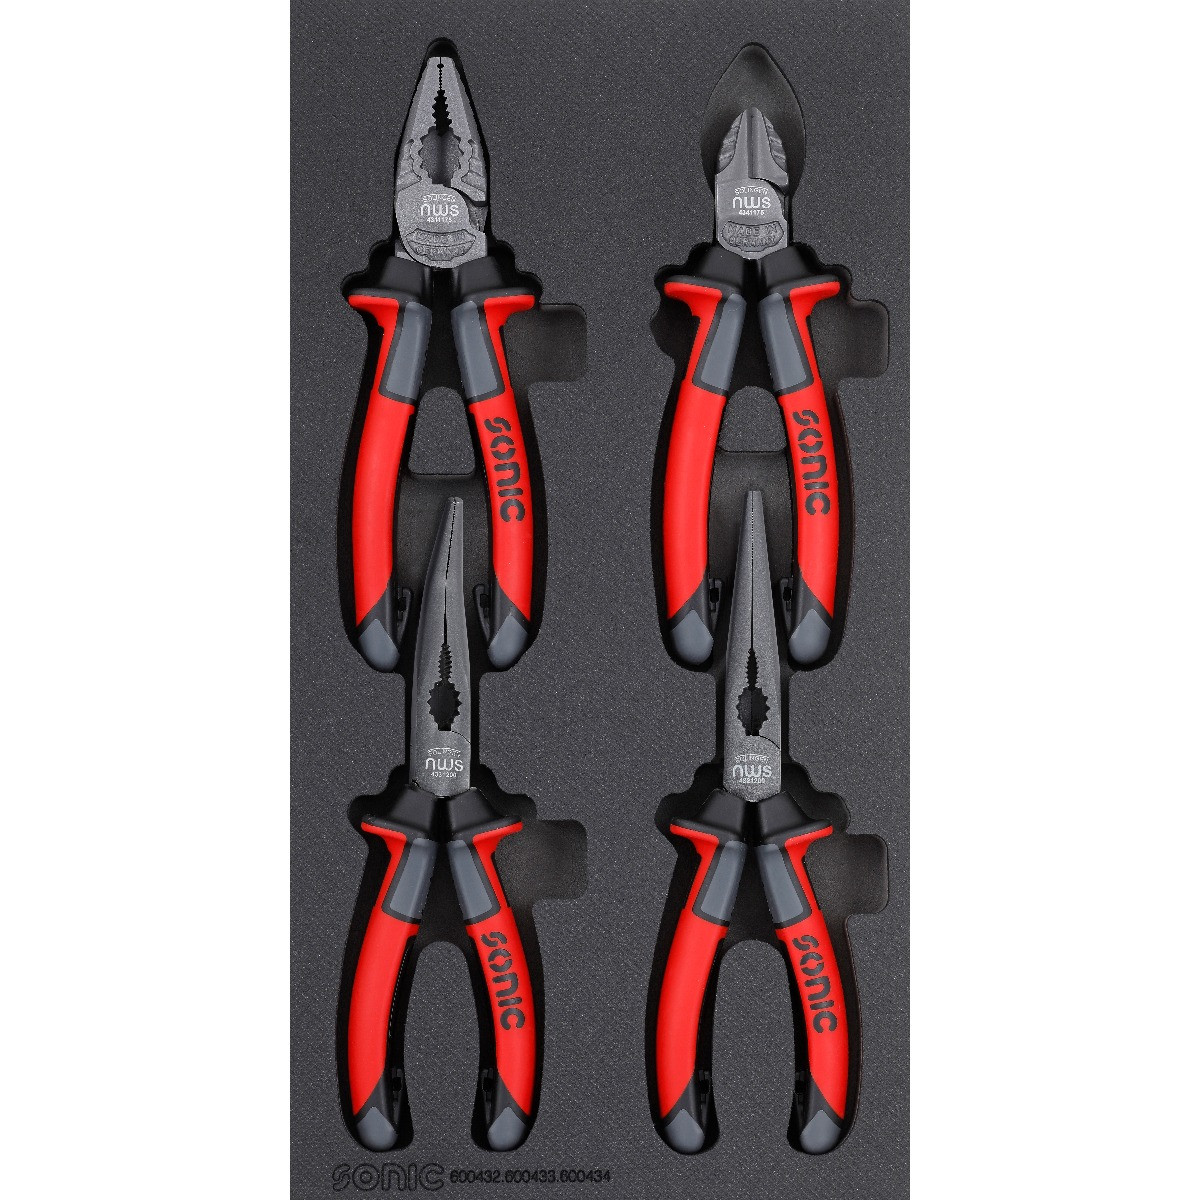 4 Piece Pliers Set by KT Pro Tools